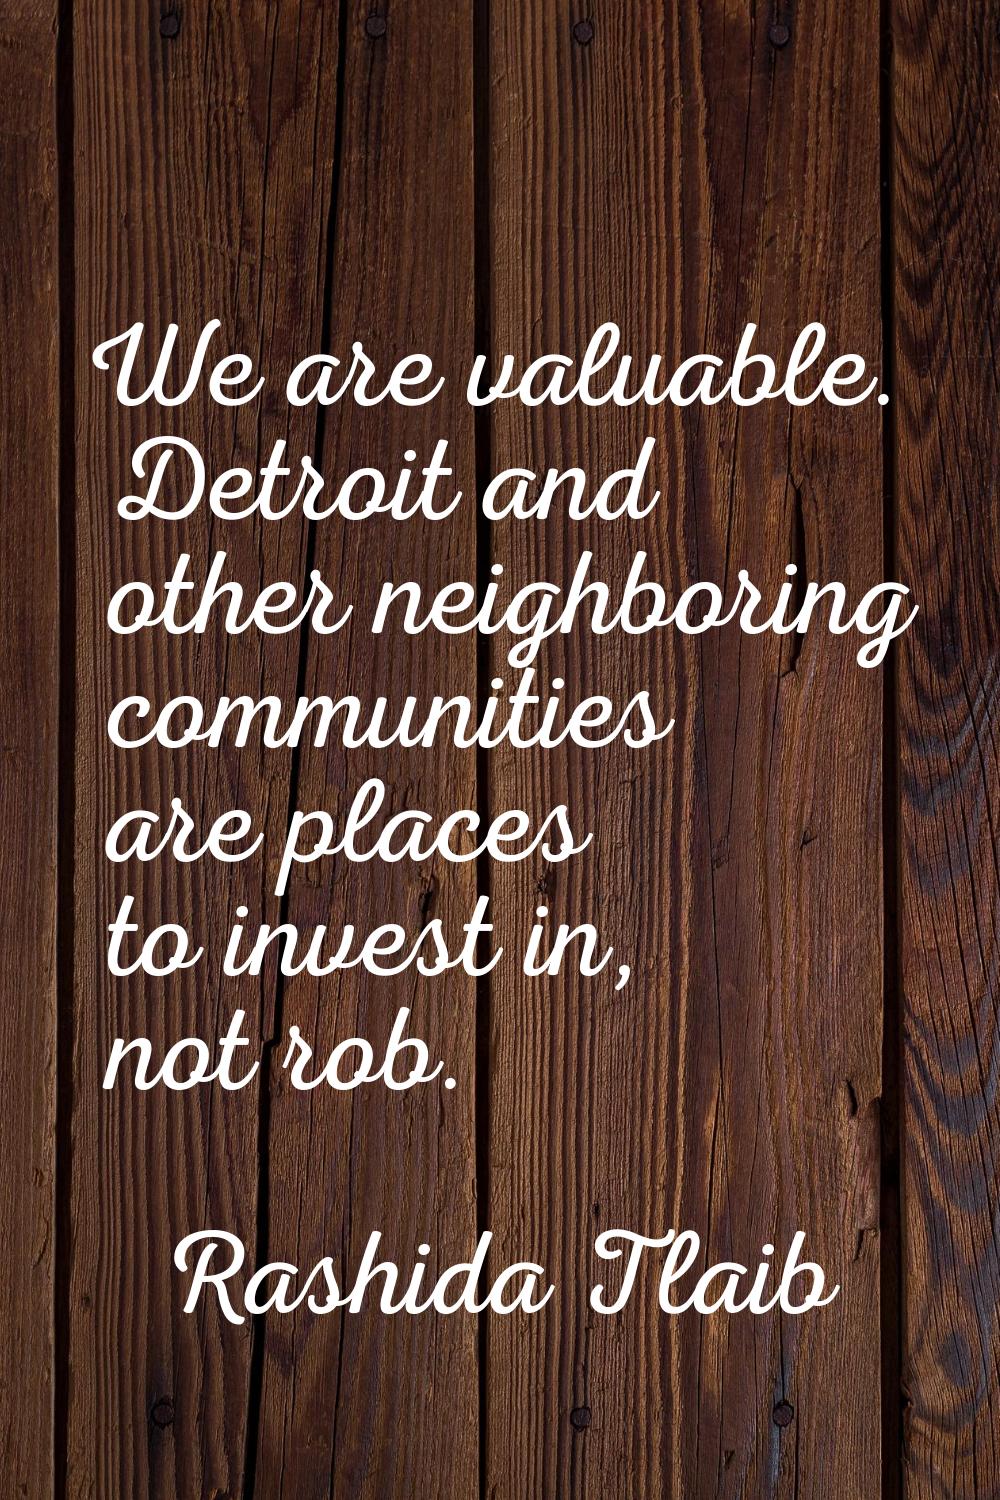 We are valuable. Detroit and other neighboring communities are places to invest in, not rob.